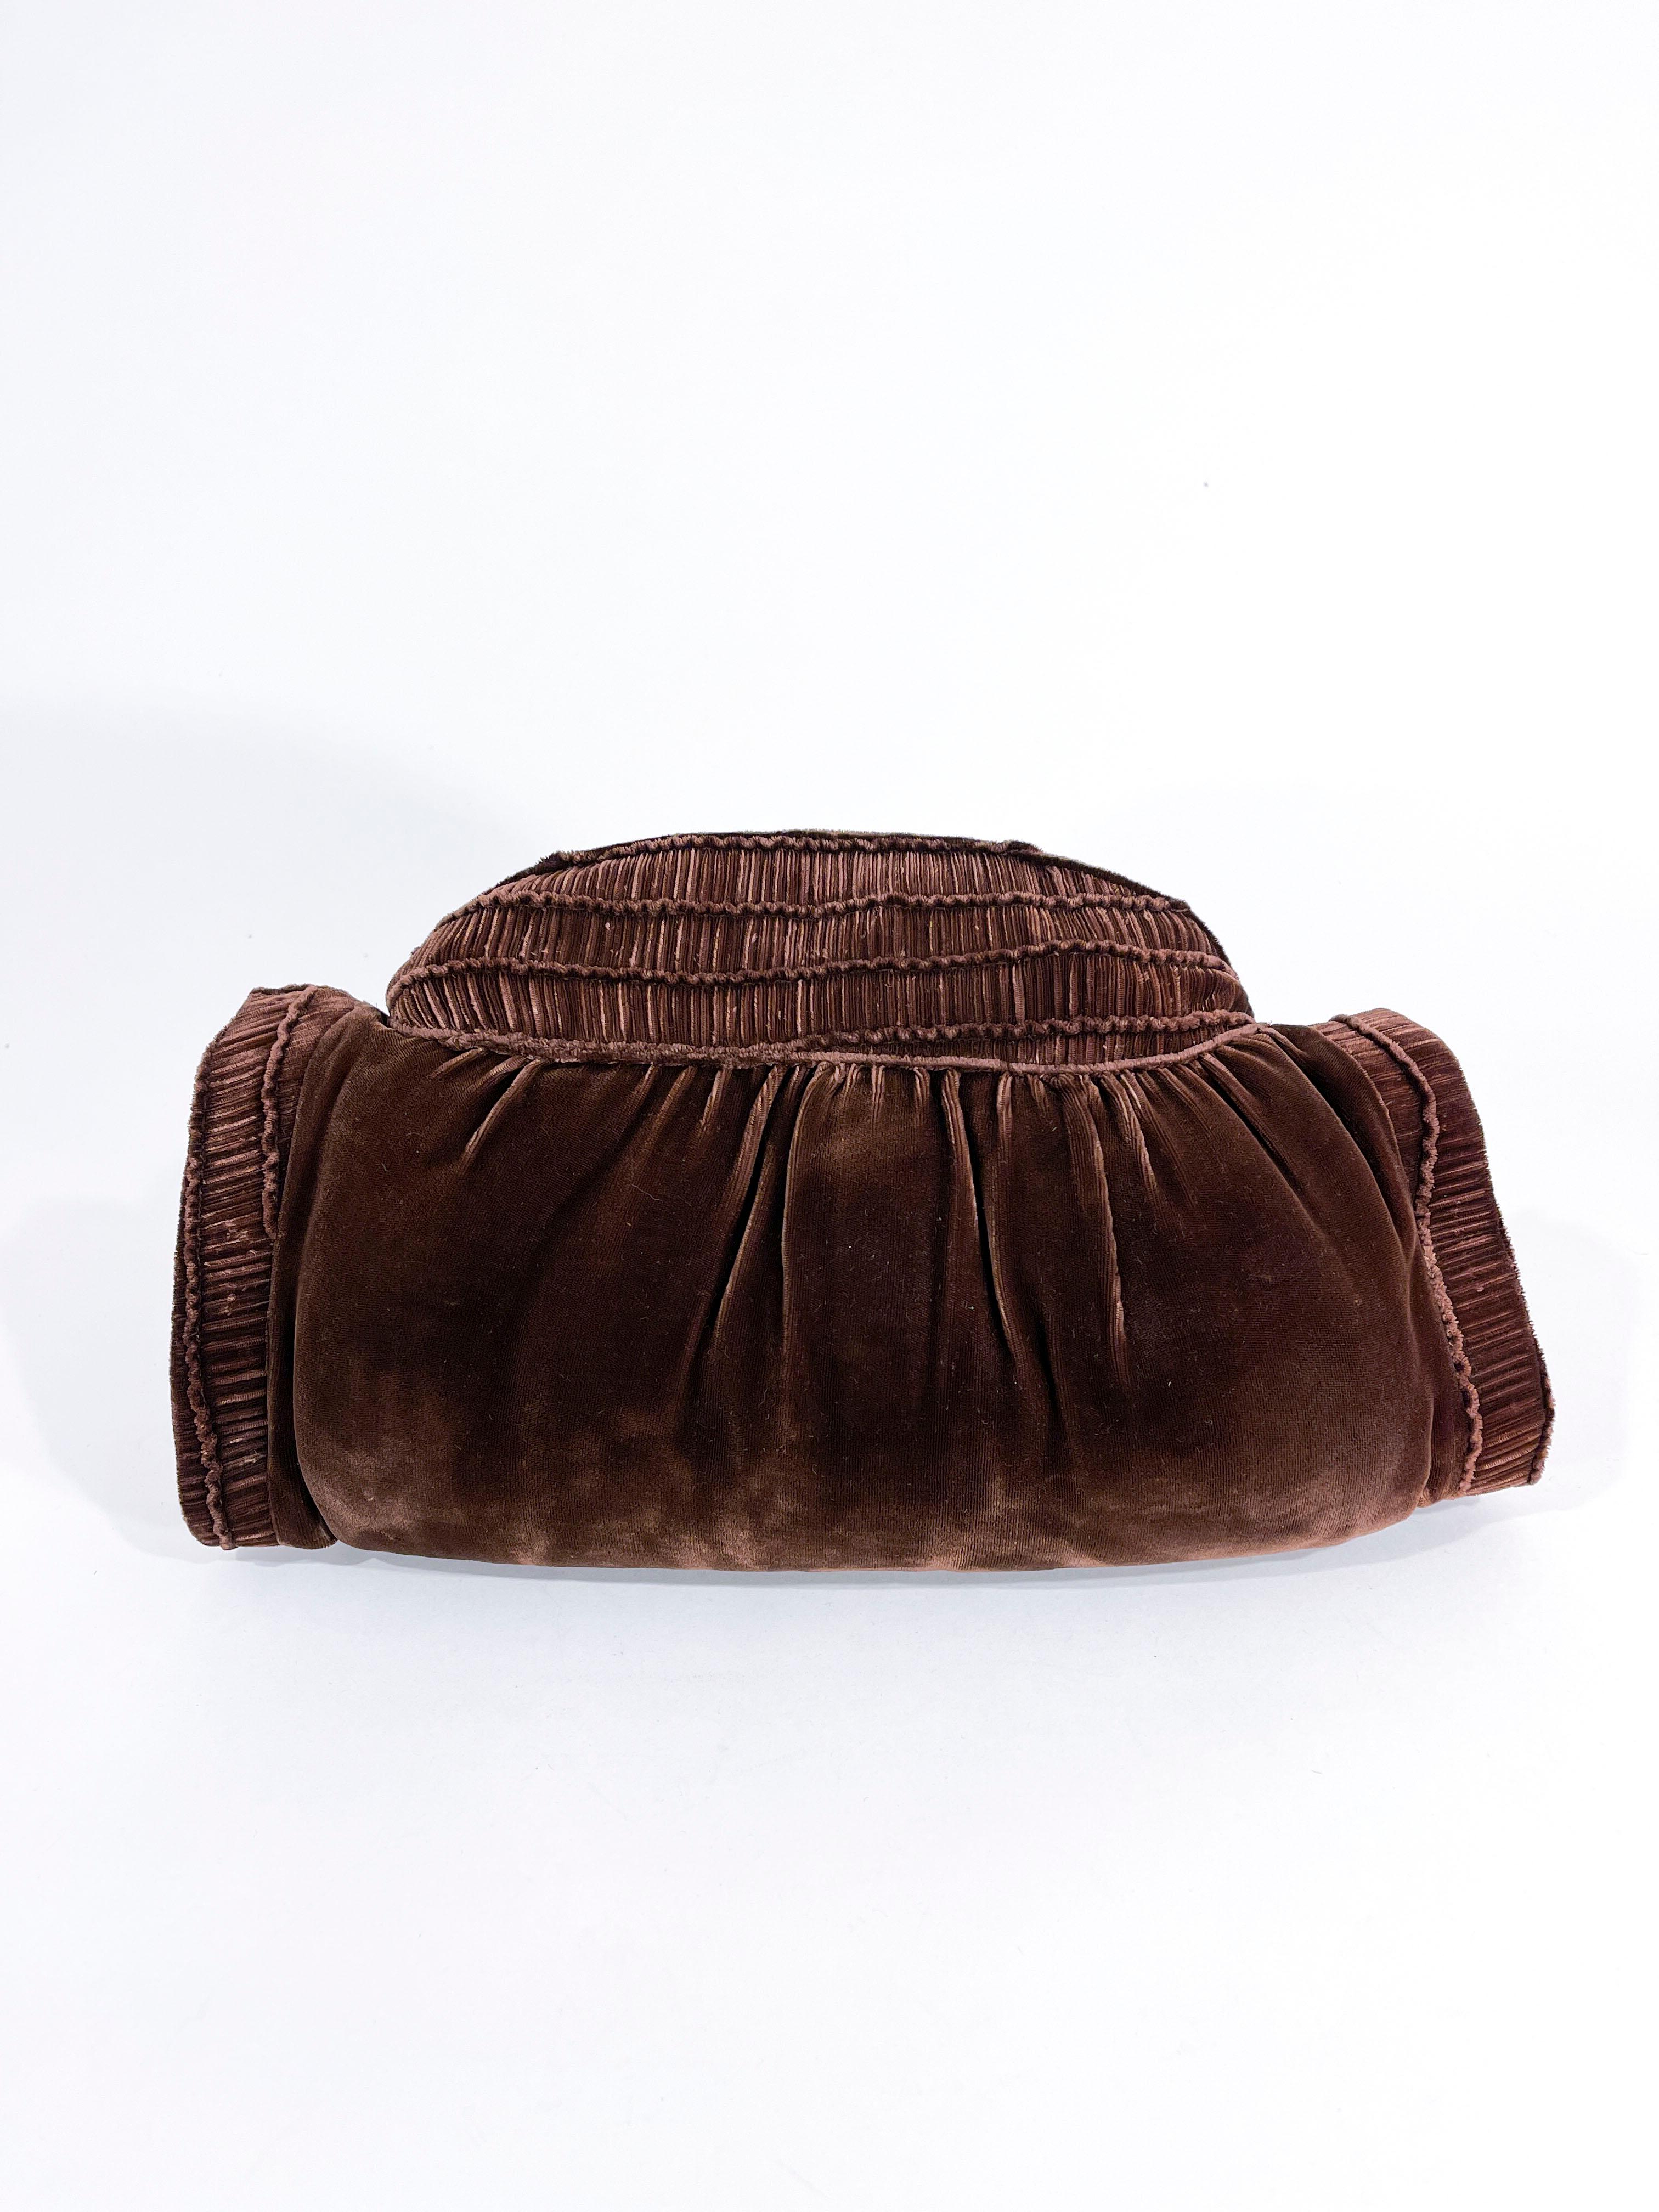 1930s Cocoa Brown Silk Velvet Purse/Muff with detailed ruching along the top and arm openings. The top has a zippered compartment with an etched celluloid zipper-pull and brass links.. The interior is lined and has a built-in coin purse. The hand